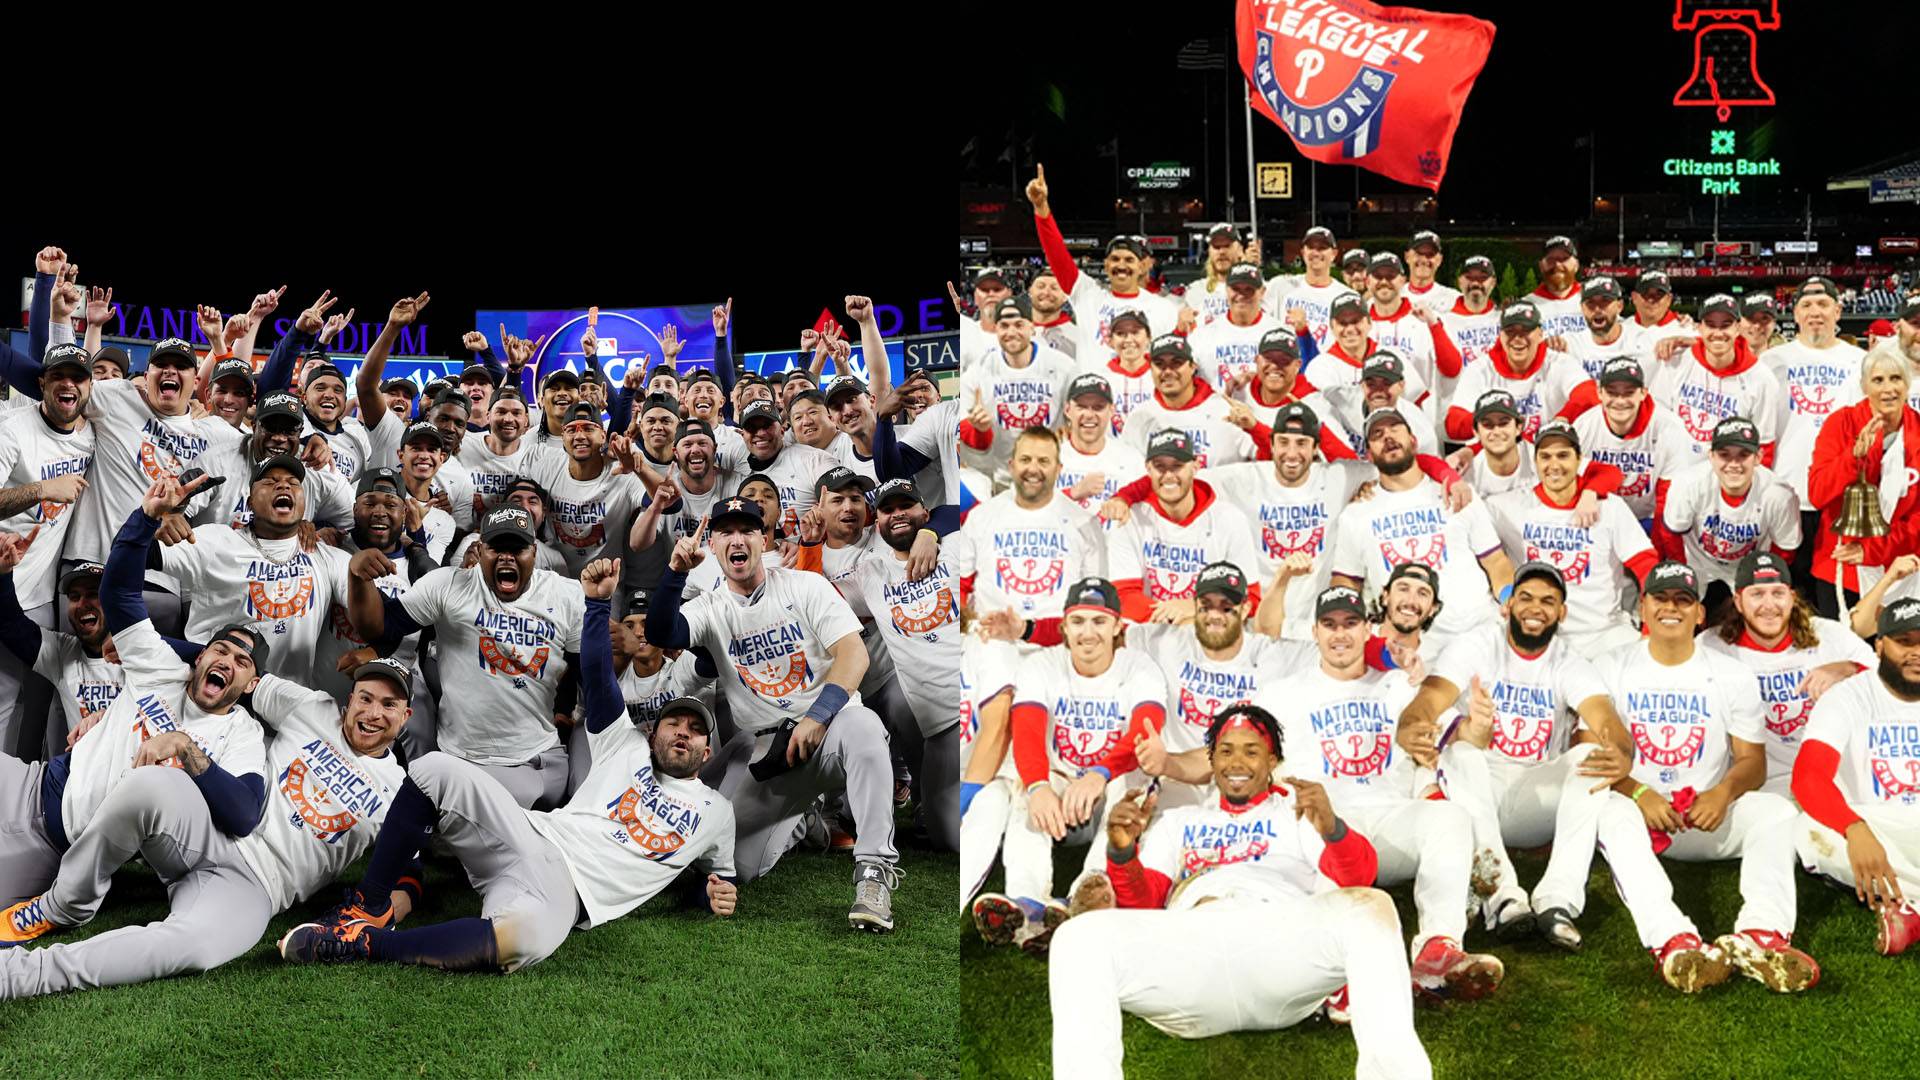 There will likely be no US-born Black players in the World Series